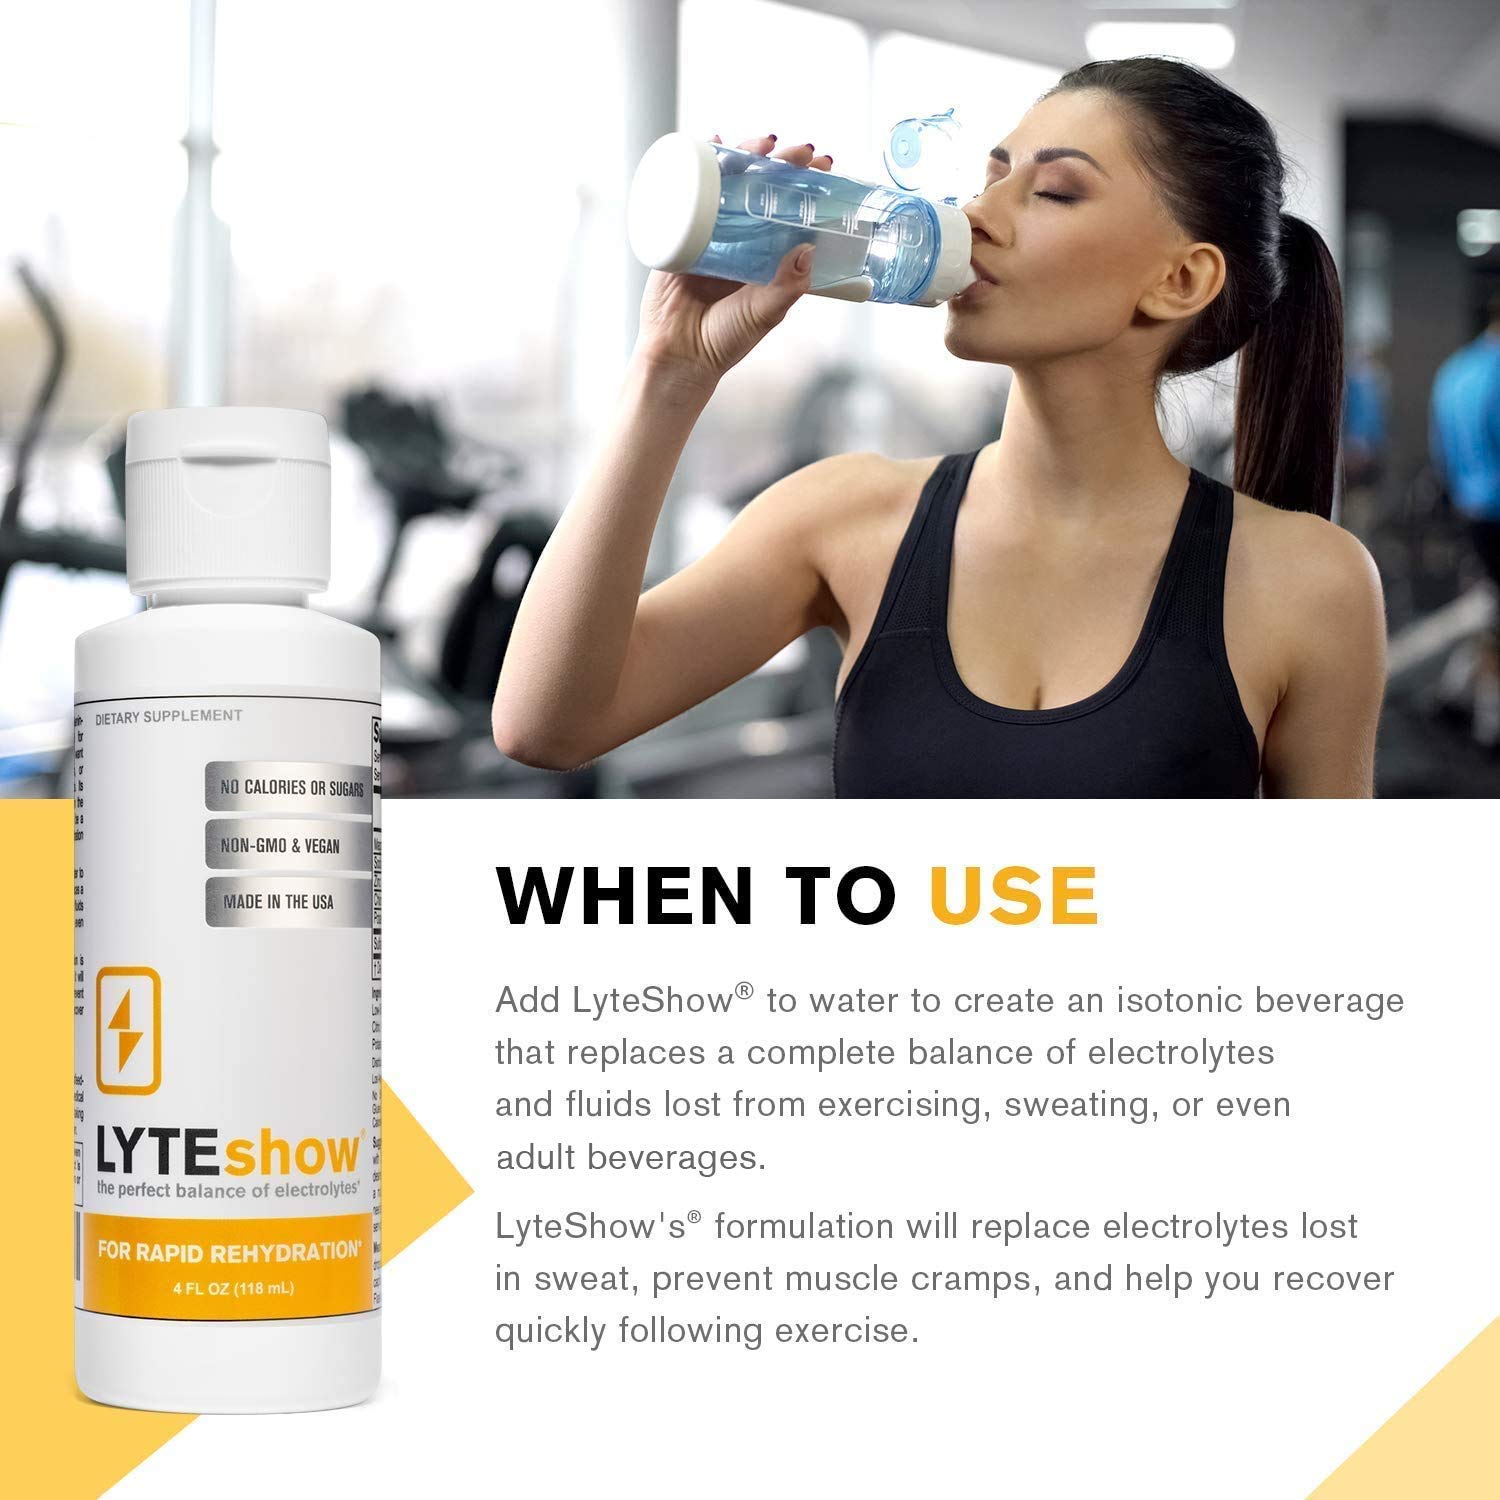 LyteShow Electrolyte Drops Sugar-Free for Hydration and Immune Support - 40 Servings - Keto Friendly - Zinc and Magnesium for Rapid Rehydration, Workout, Muscle Recovery and Energy - Vegan